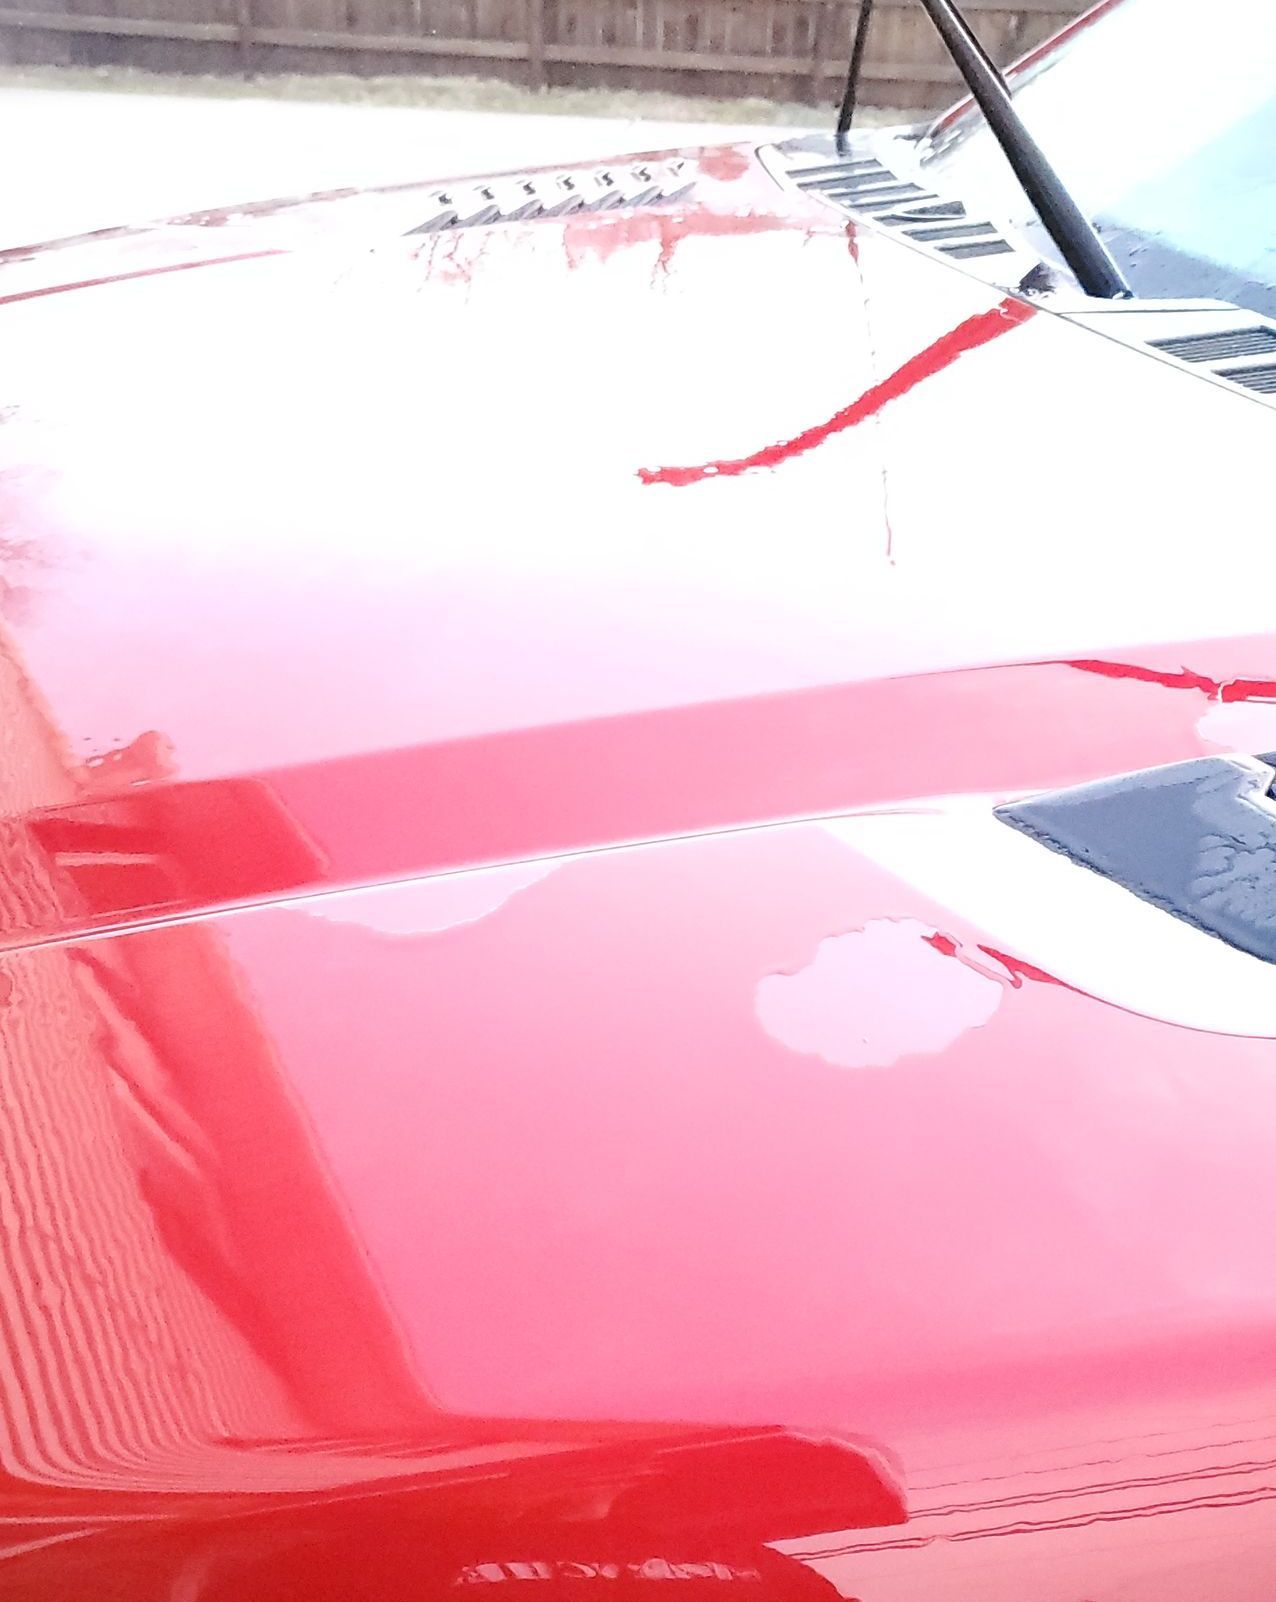 Water sheeting off of vehicle | Hydrophilic paint surface